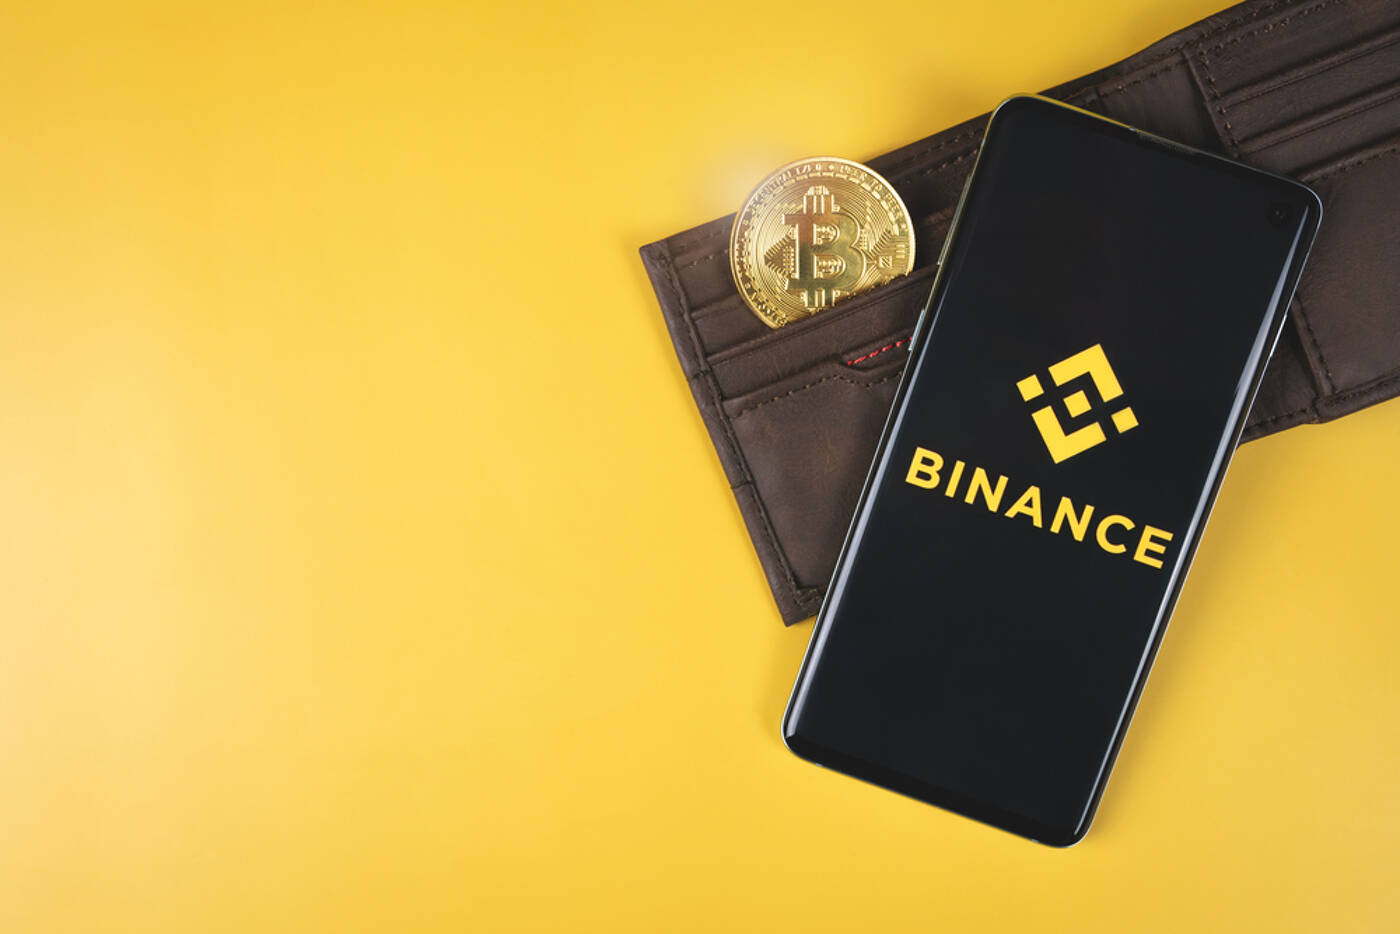 The CEO of Binance Is the Wealthiest Crypto Billionaire